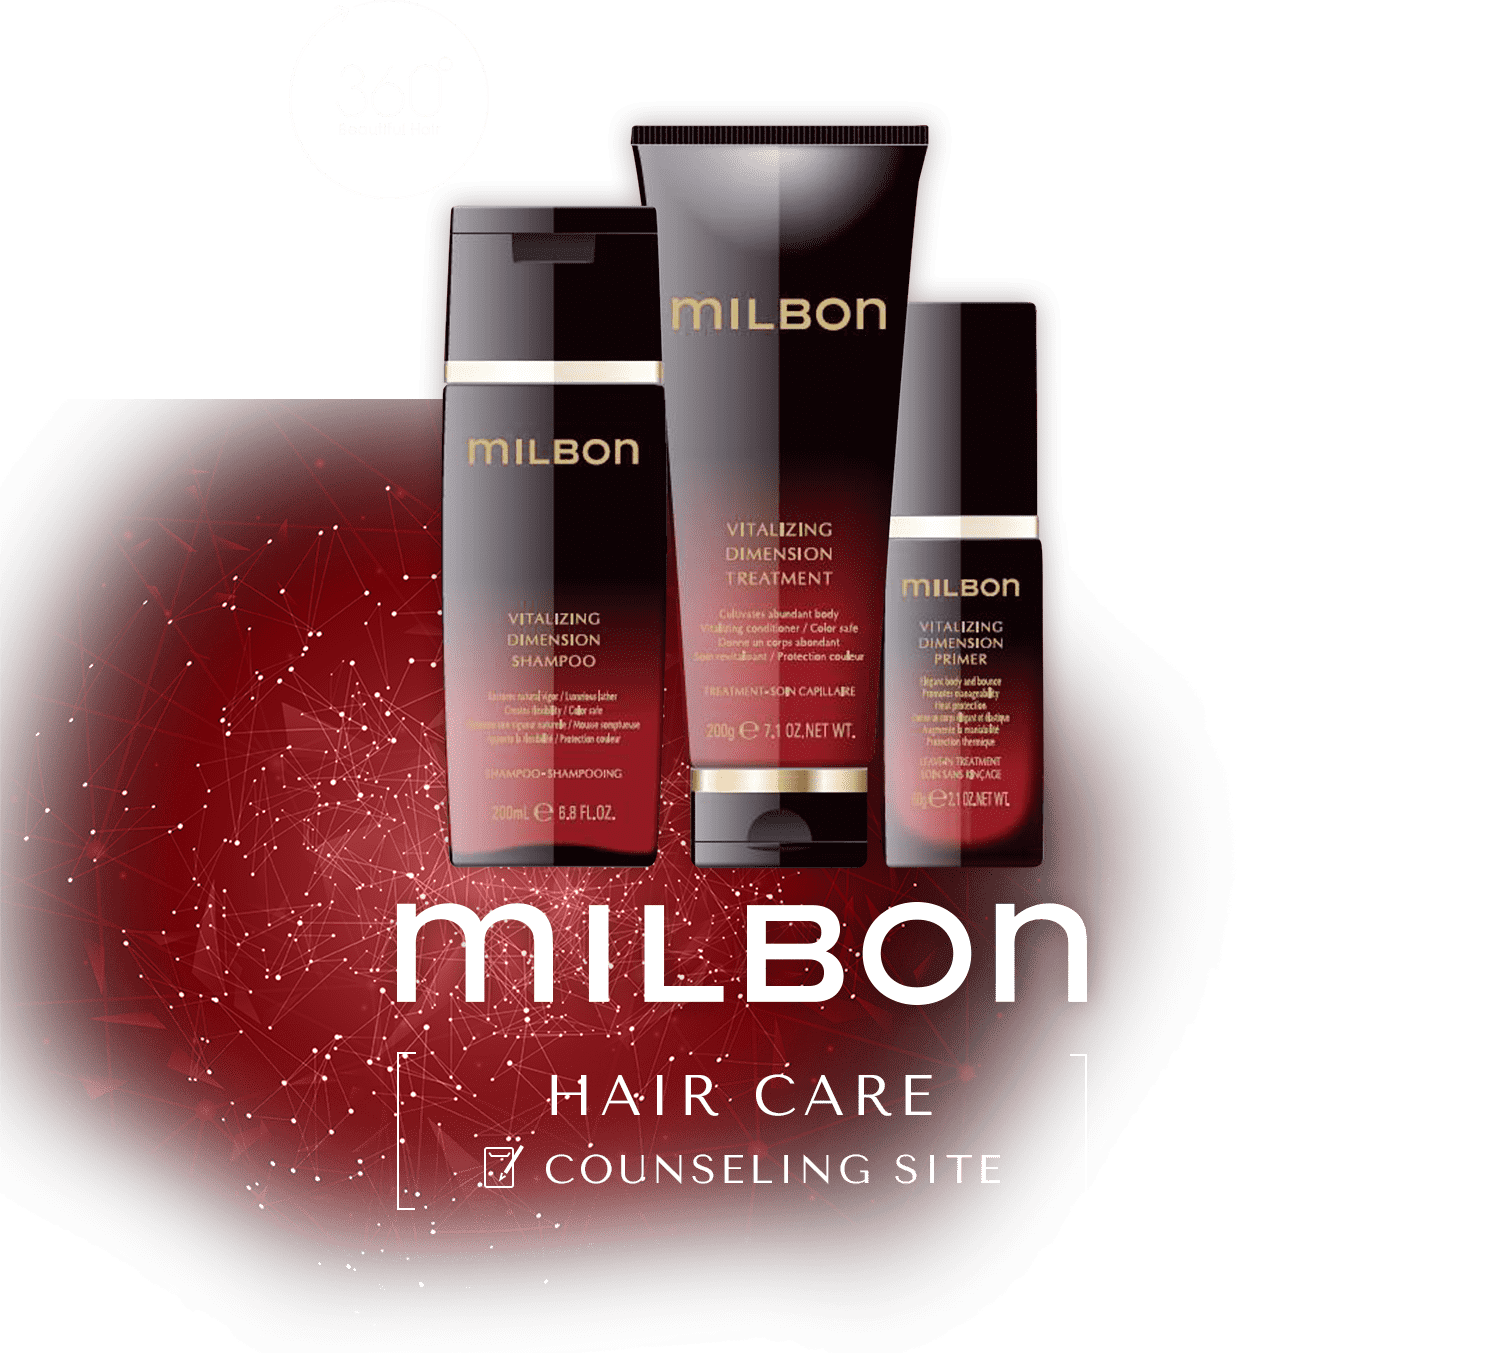 Milbon HAIR CARE COUNSELING SITE